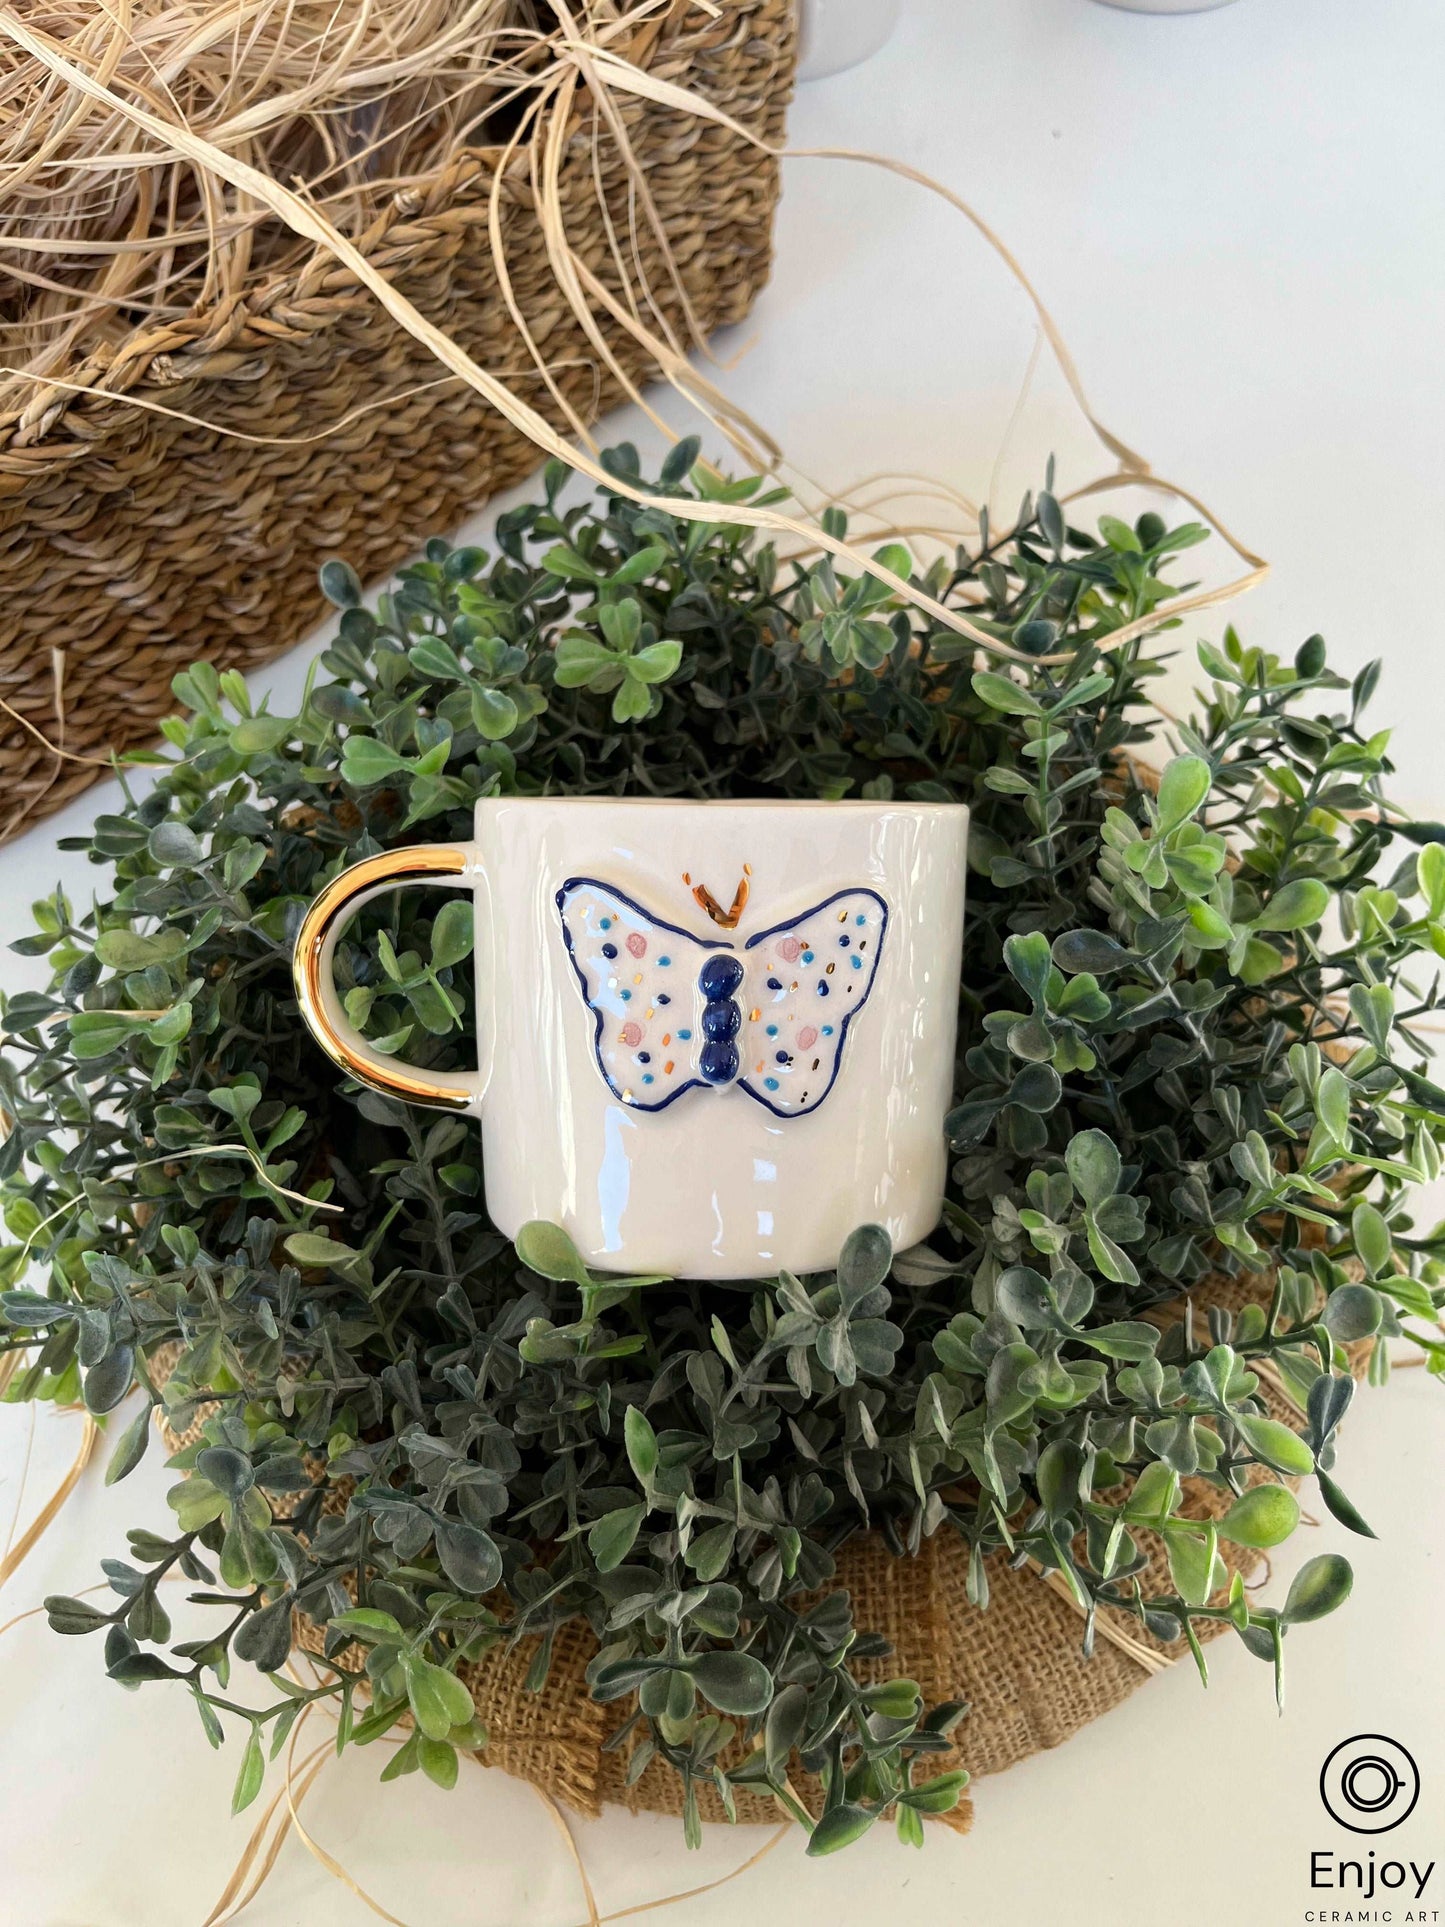 A white ceramic mug with a golden handle and a blue butterfly illustration is nestled in a lush bed of greenery, with a woven basket and dried straw adding texture to the composition, creating a harmonious blend of nature and artisanal craftsmanship